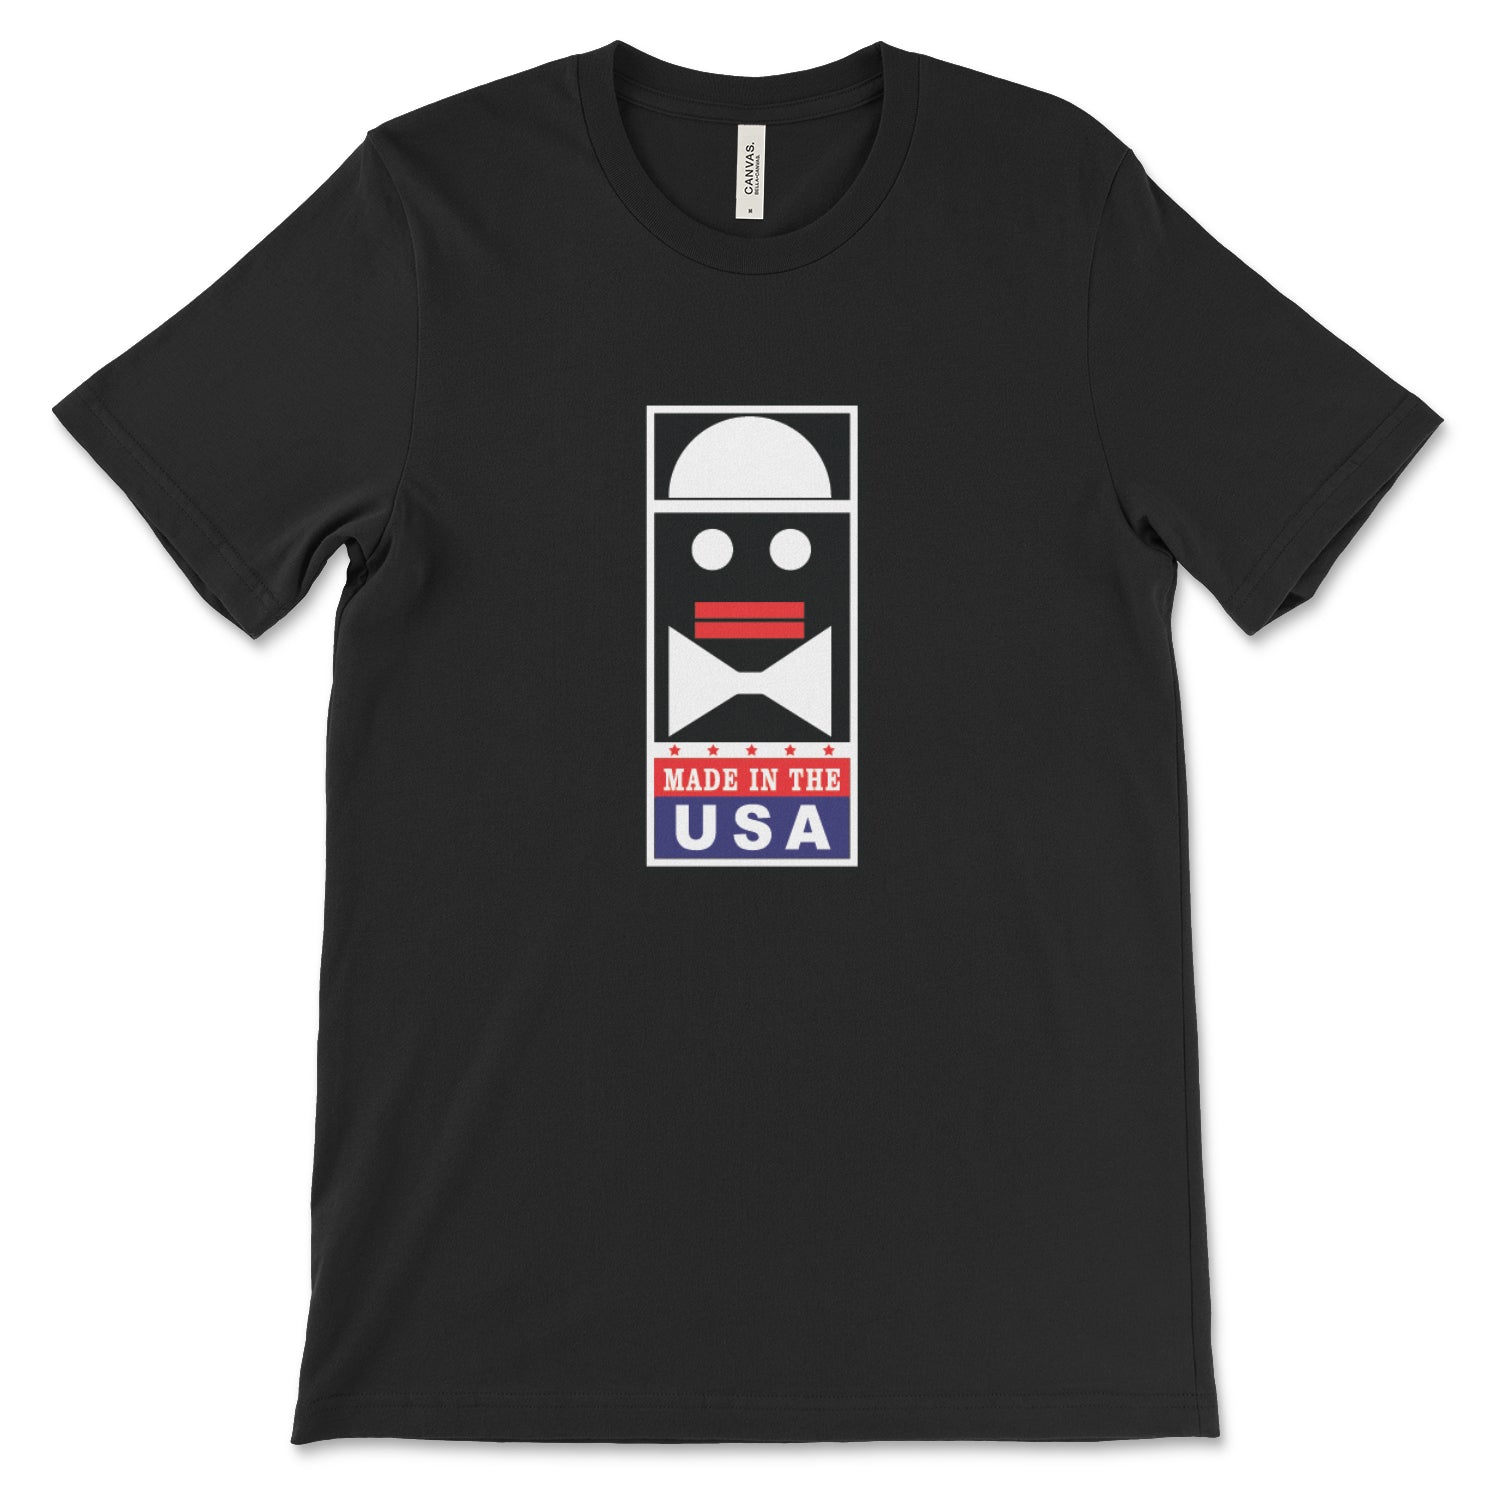 Made in USA  - Unisex T-Shirt